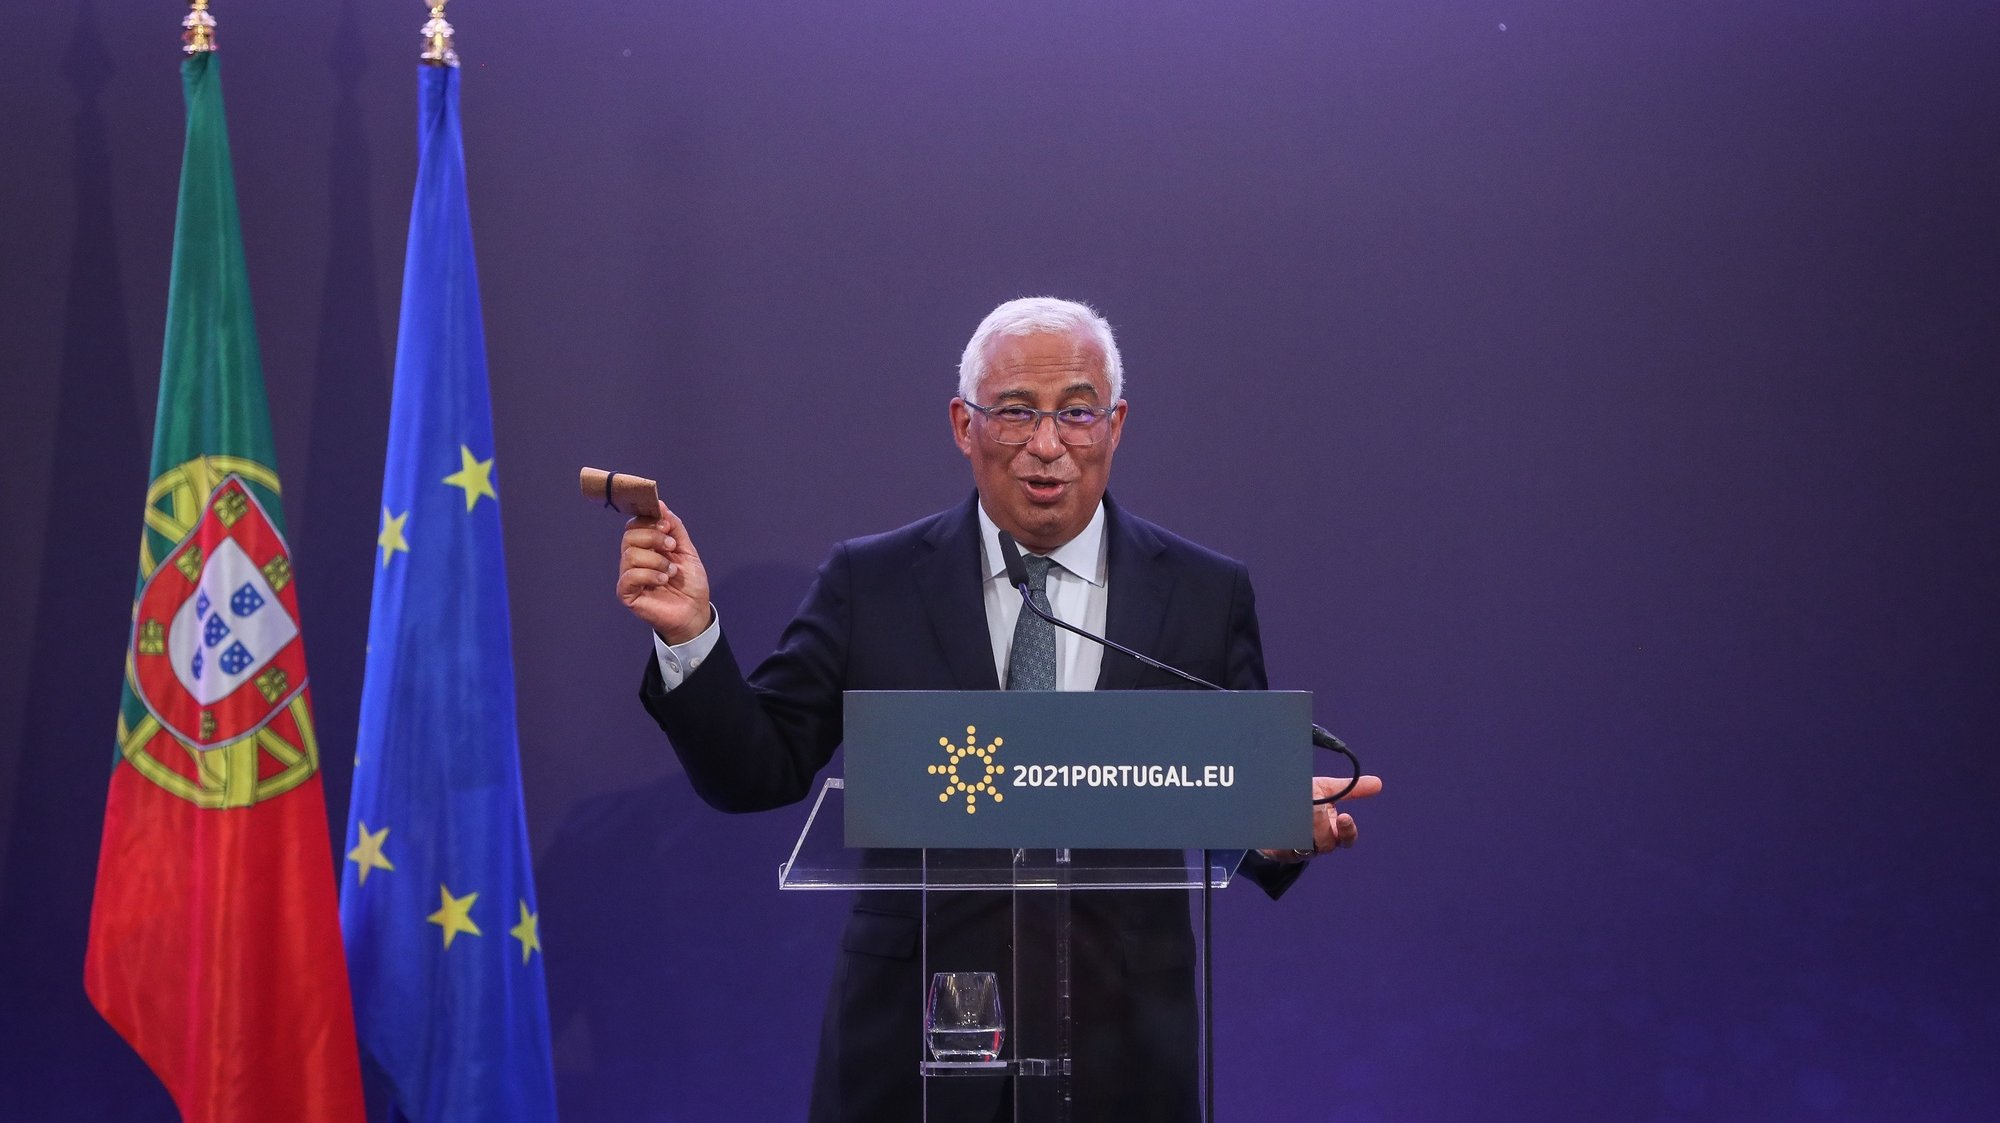 Portuguese Prime Minister, António Costa, shows a protective cork mask carrier during the press conference at the end of the European Council meeting, at Centro Cultural de Belém, Lisbon, March 25, 2021. MÁRIO CRUZ/LUSA